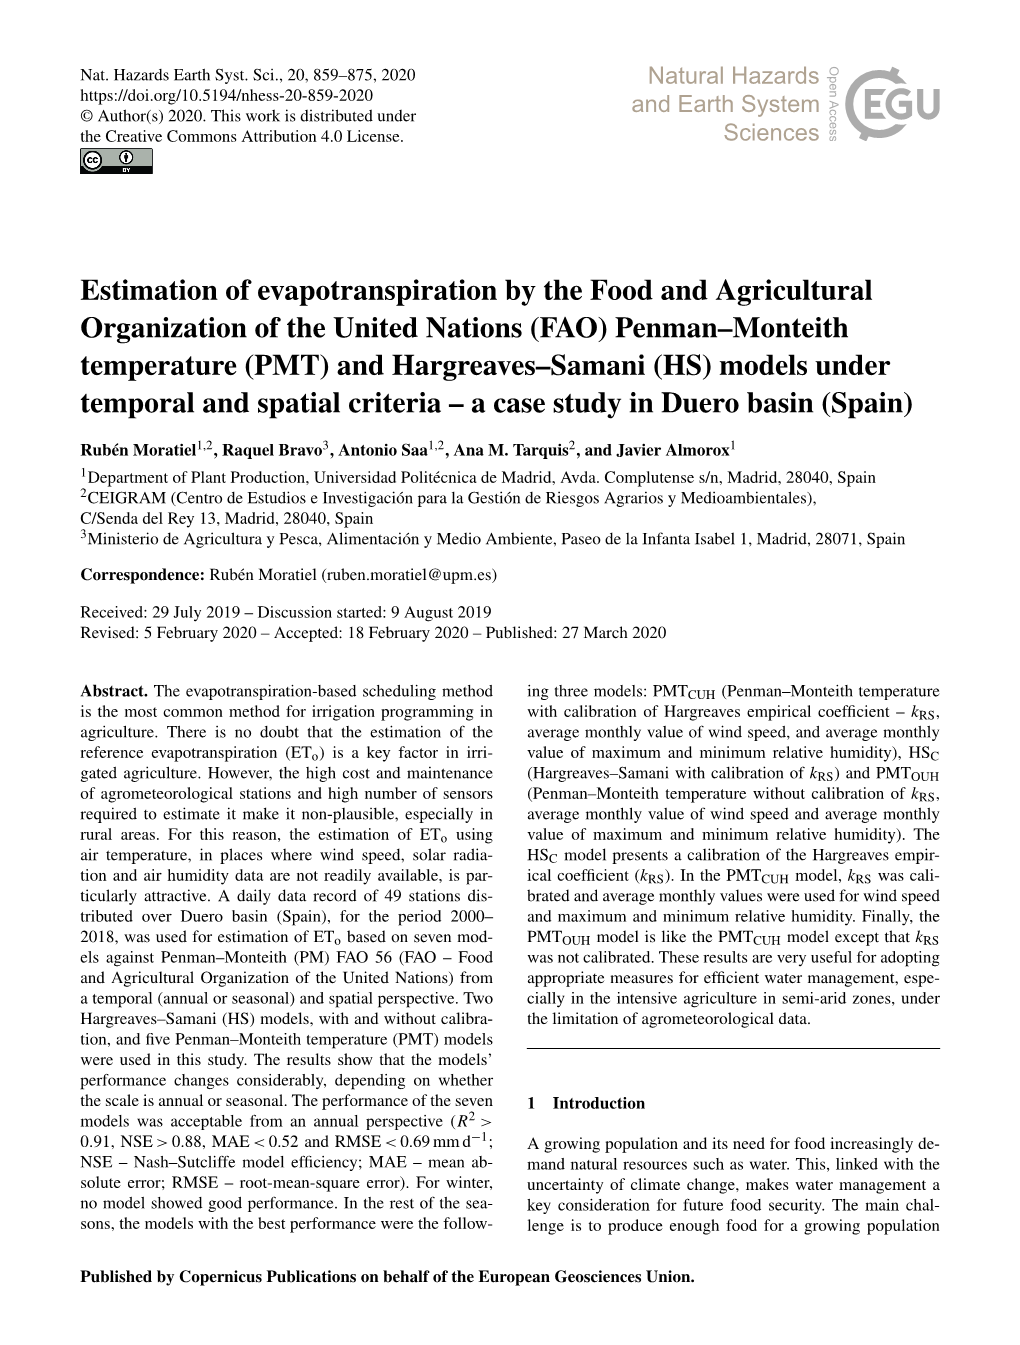 Estimation of Evapotranspiration by the Food and Agricultural